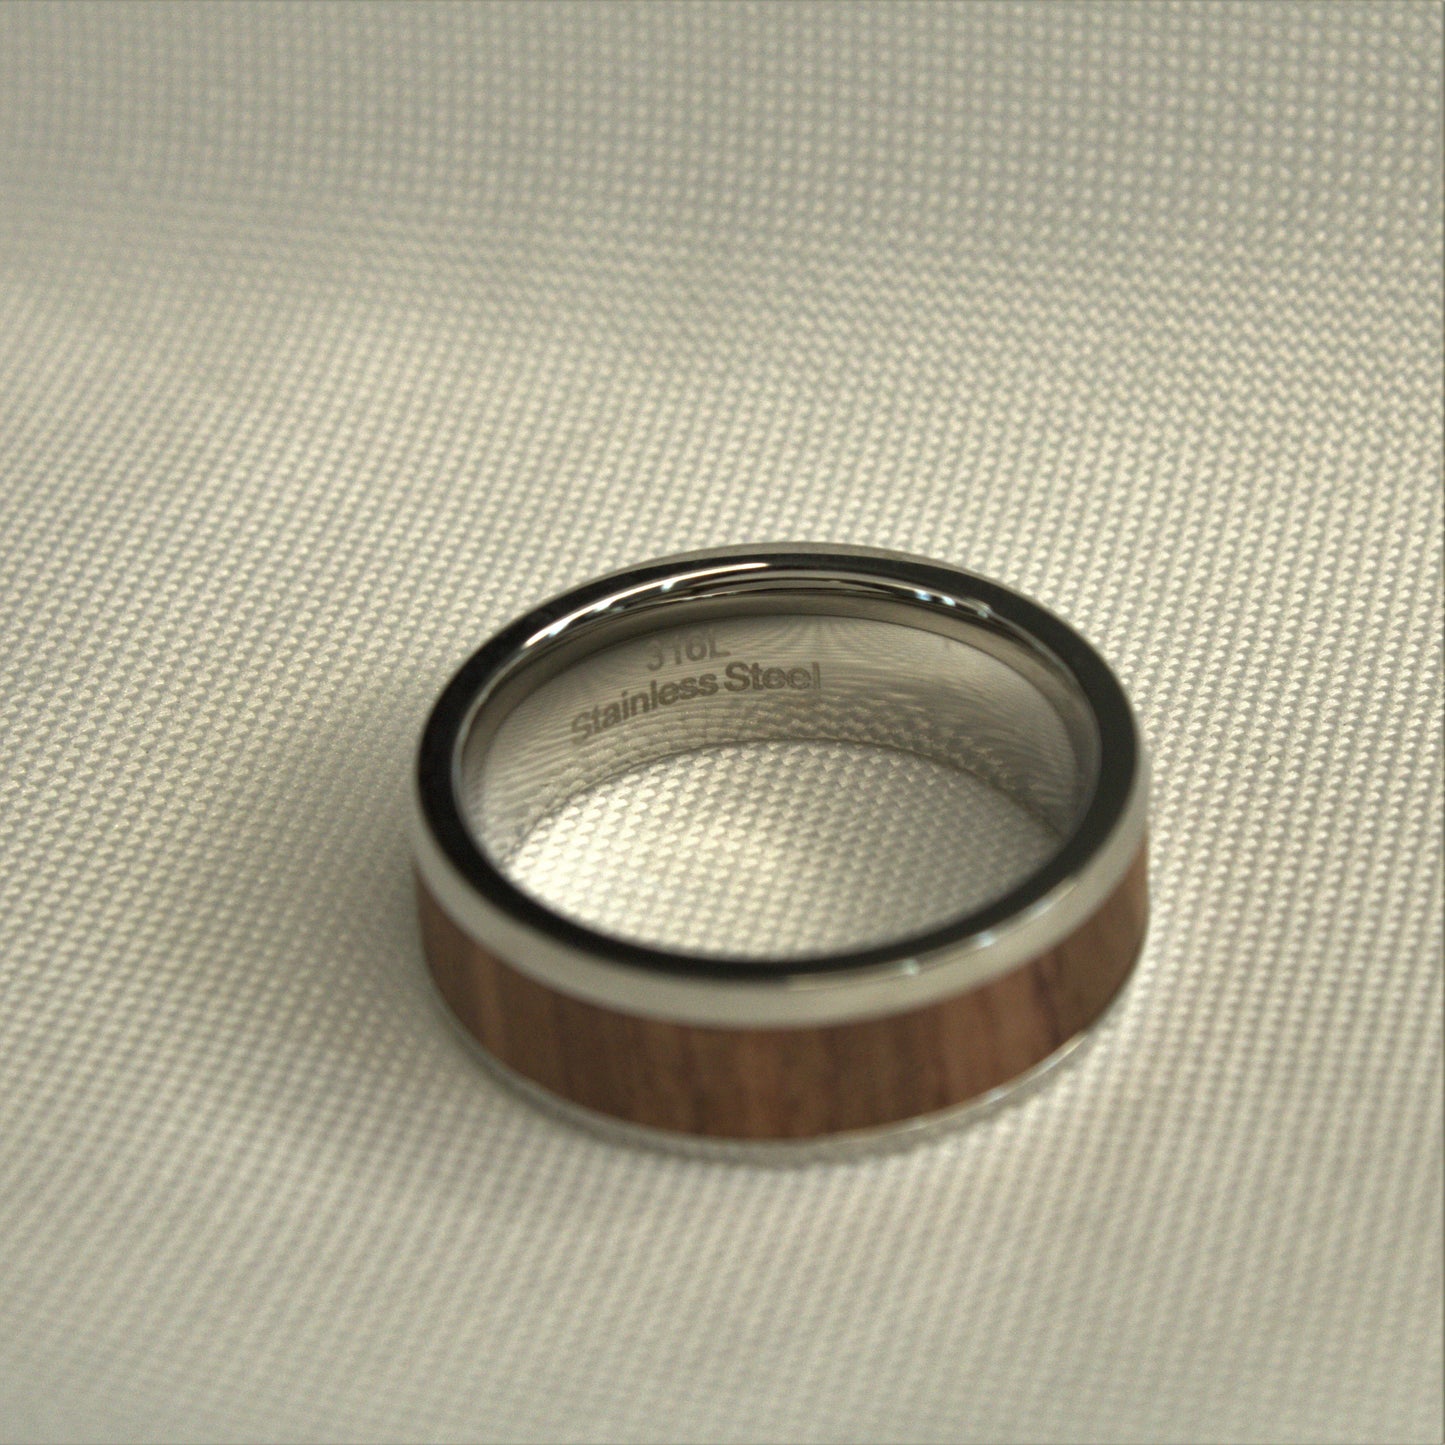 Wooden Band Ring